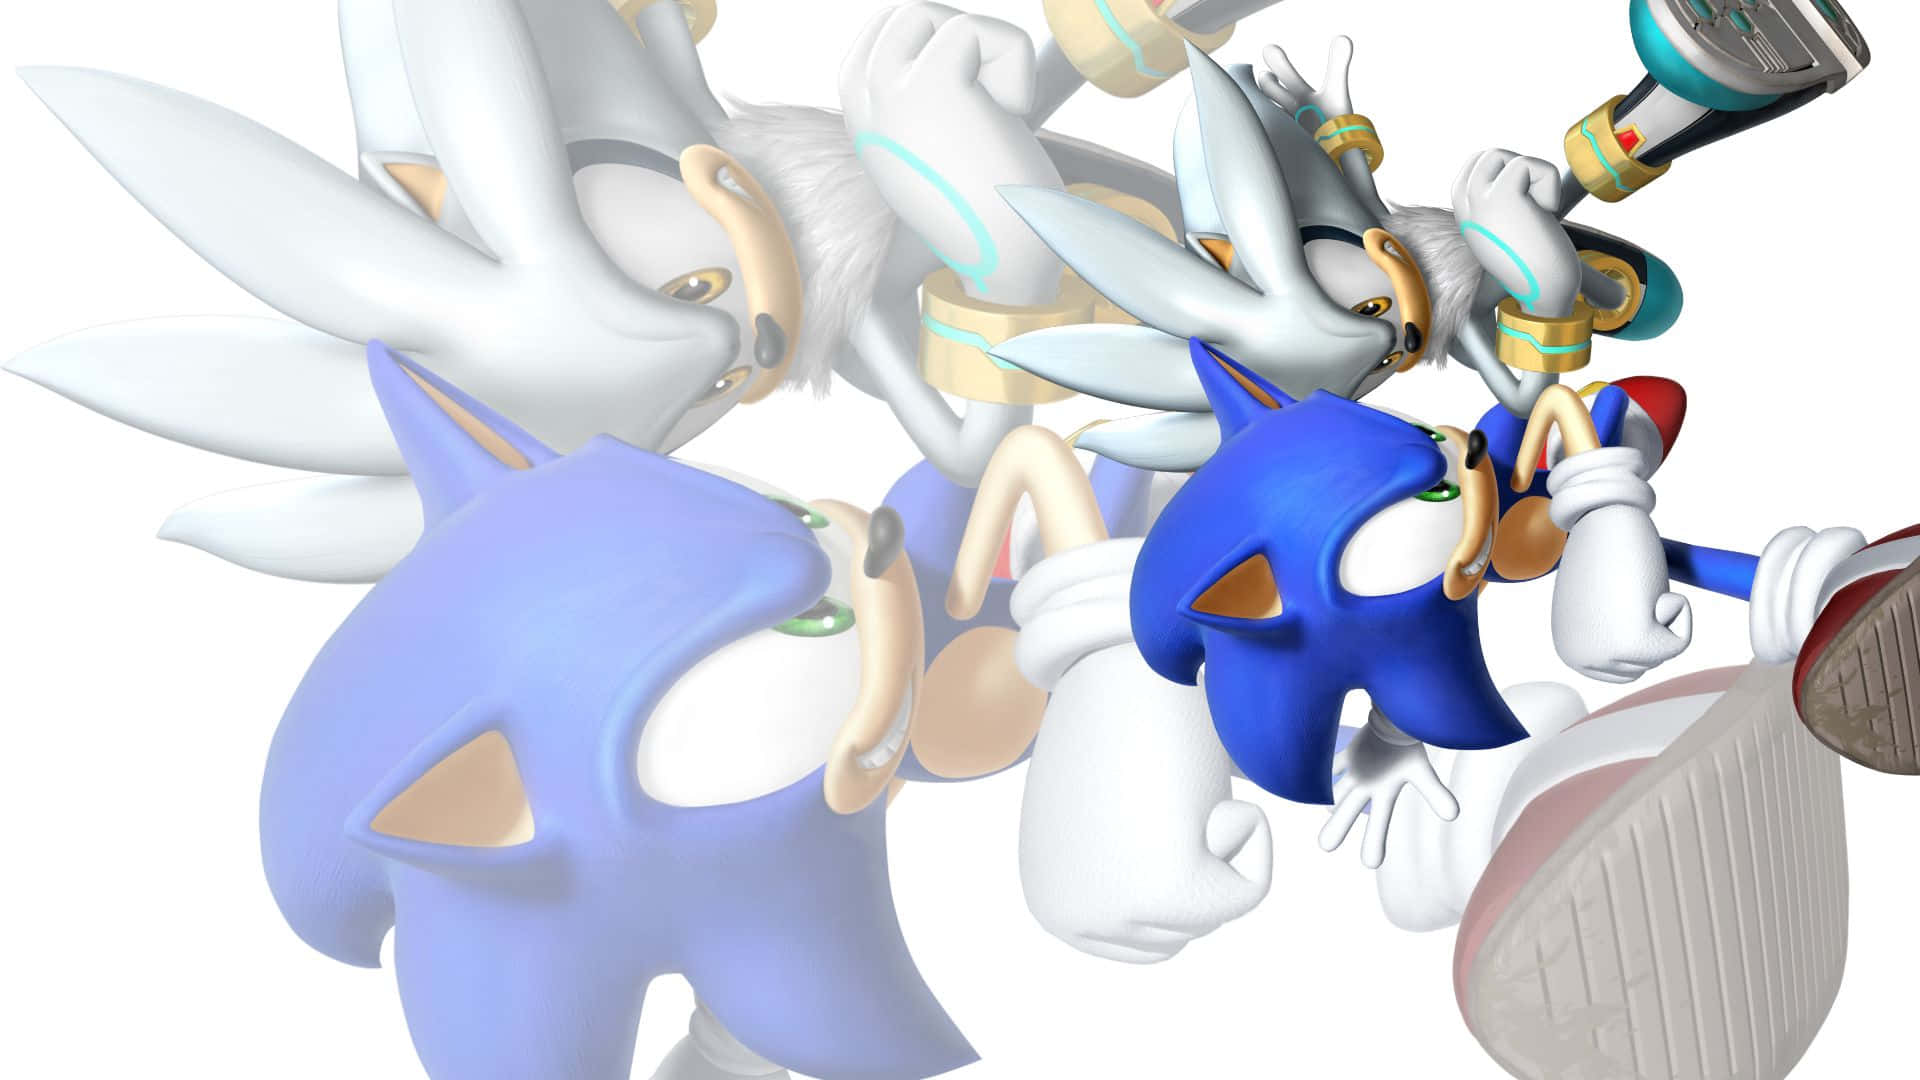 Sonic and Silver in Action Wallpaper